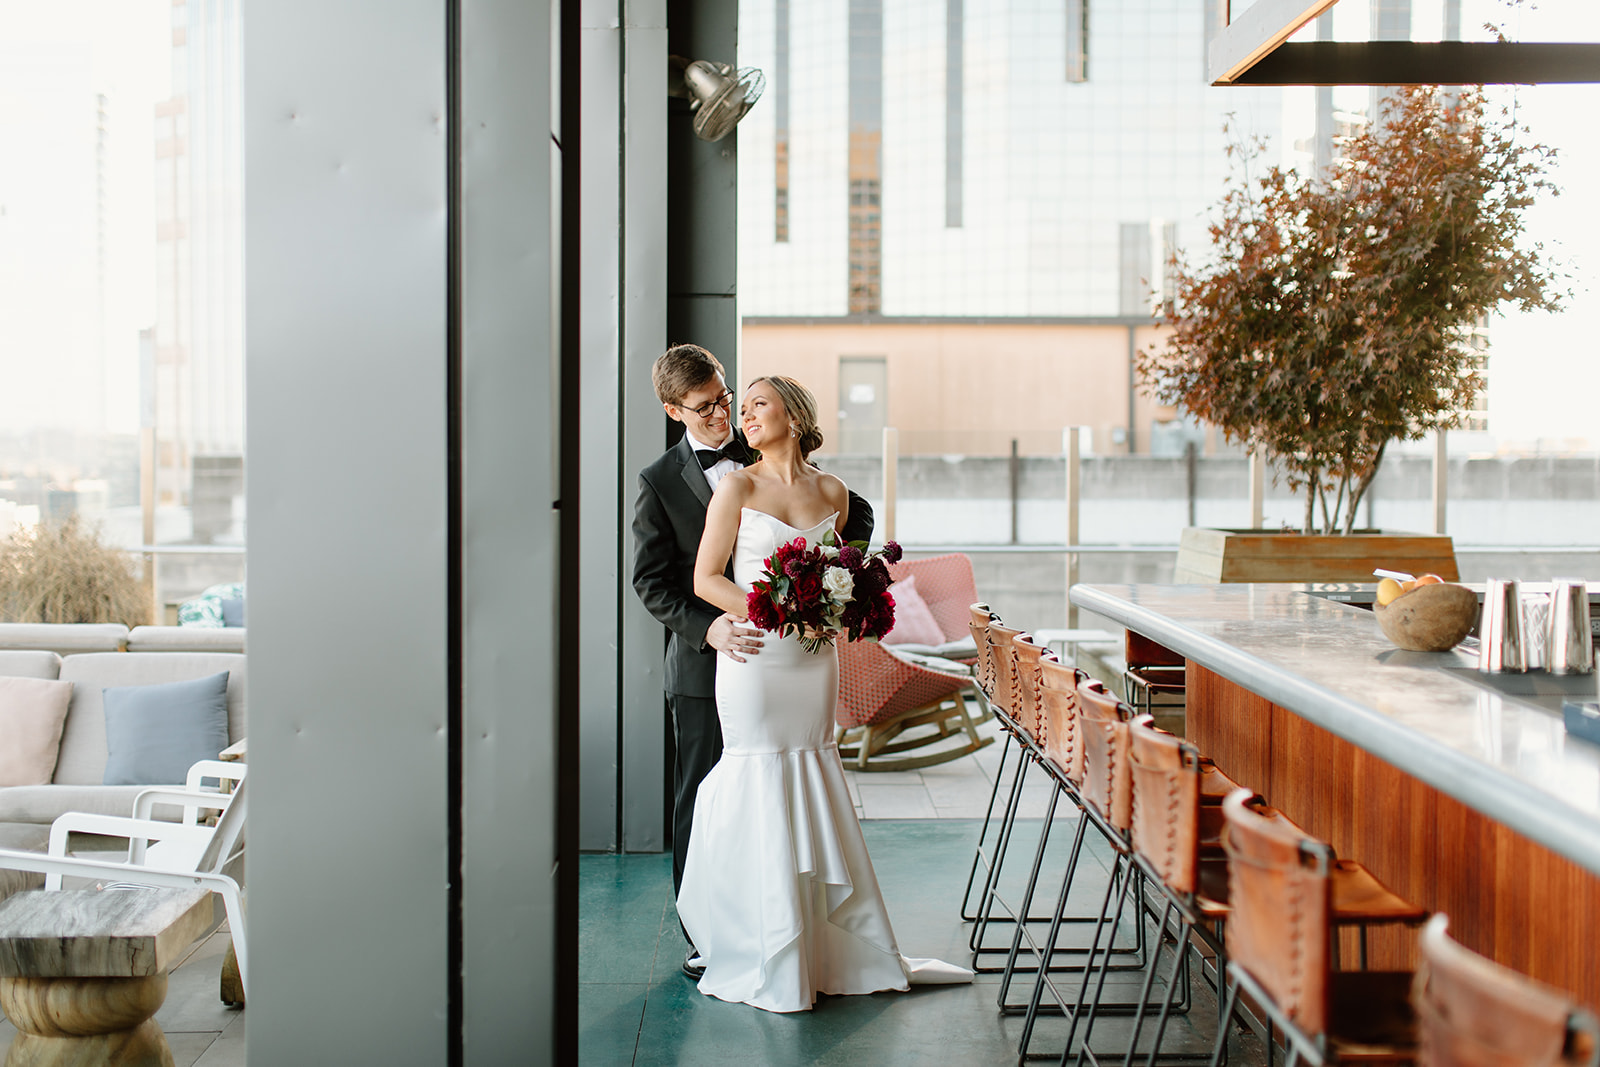 Timeless Wedding at Noelle Hotel with Gorgeous Flowers